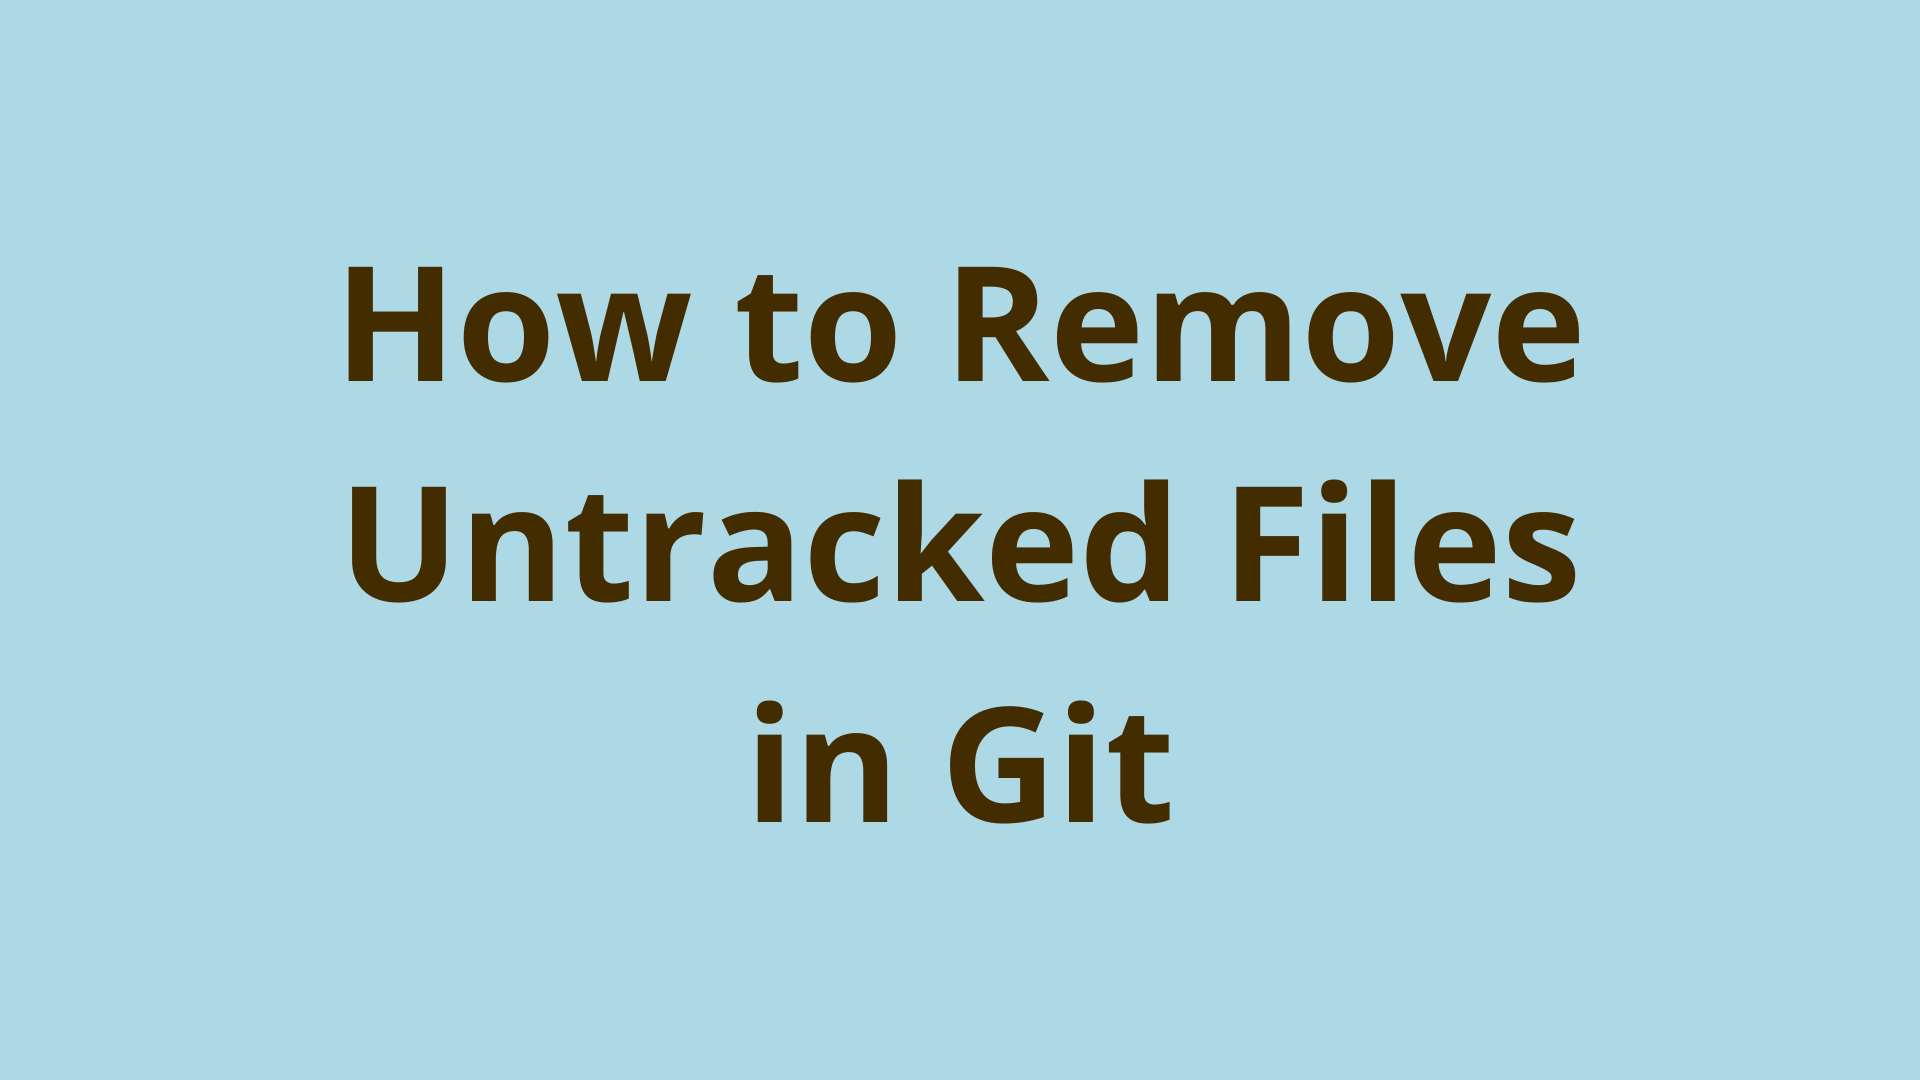 Image of How to Remove Local Untracked Files in Git Working Directory